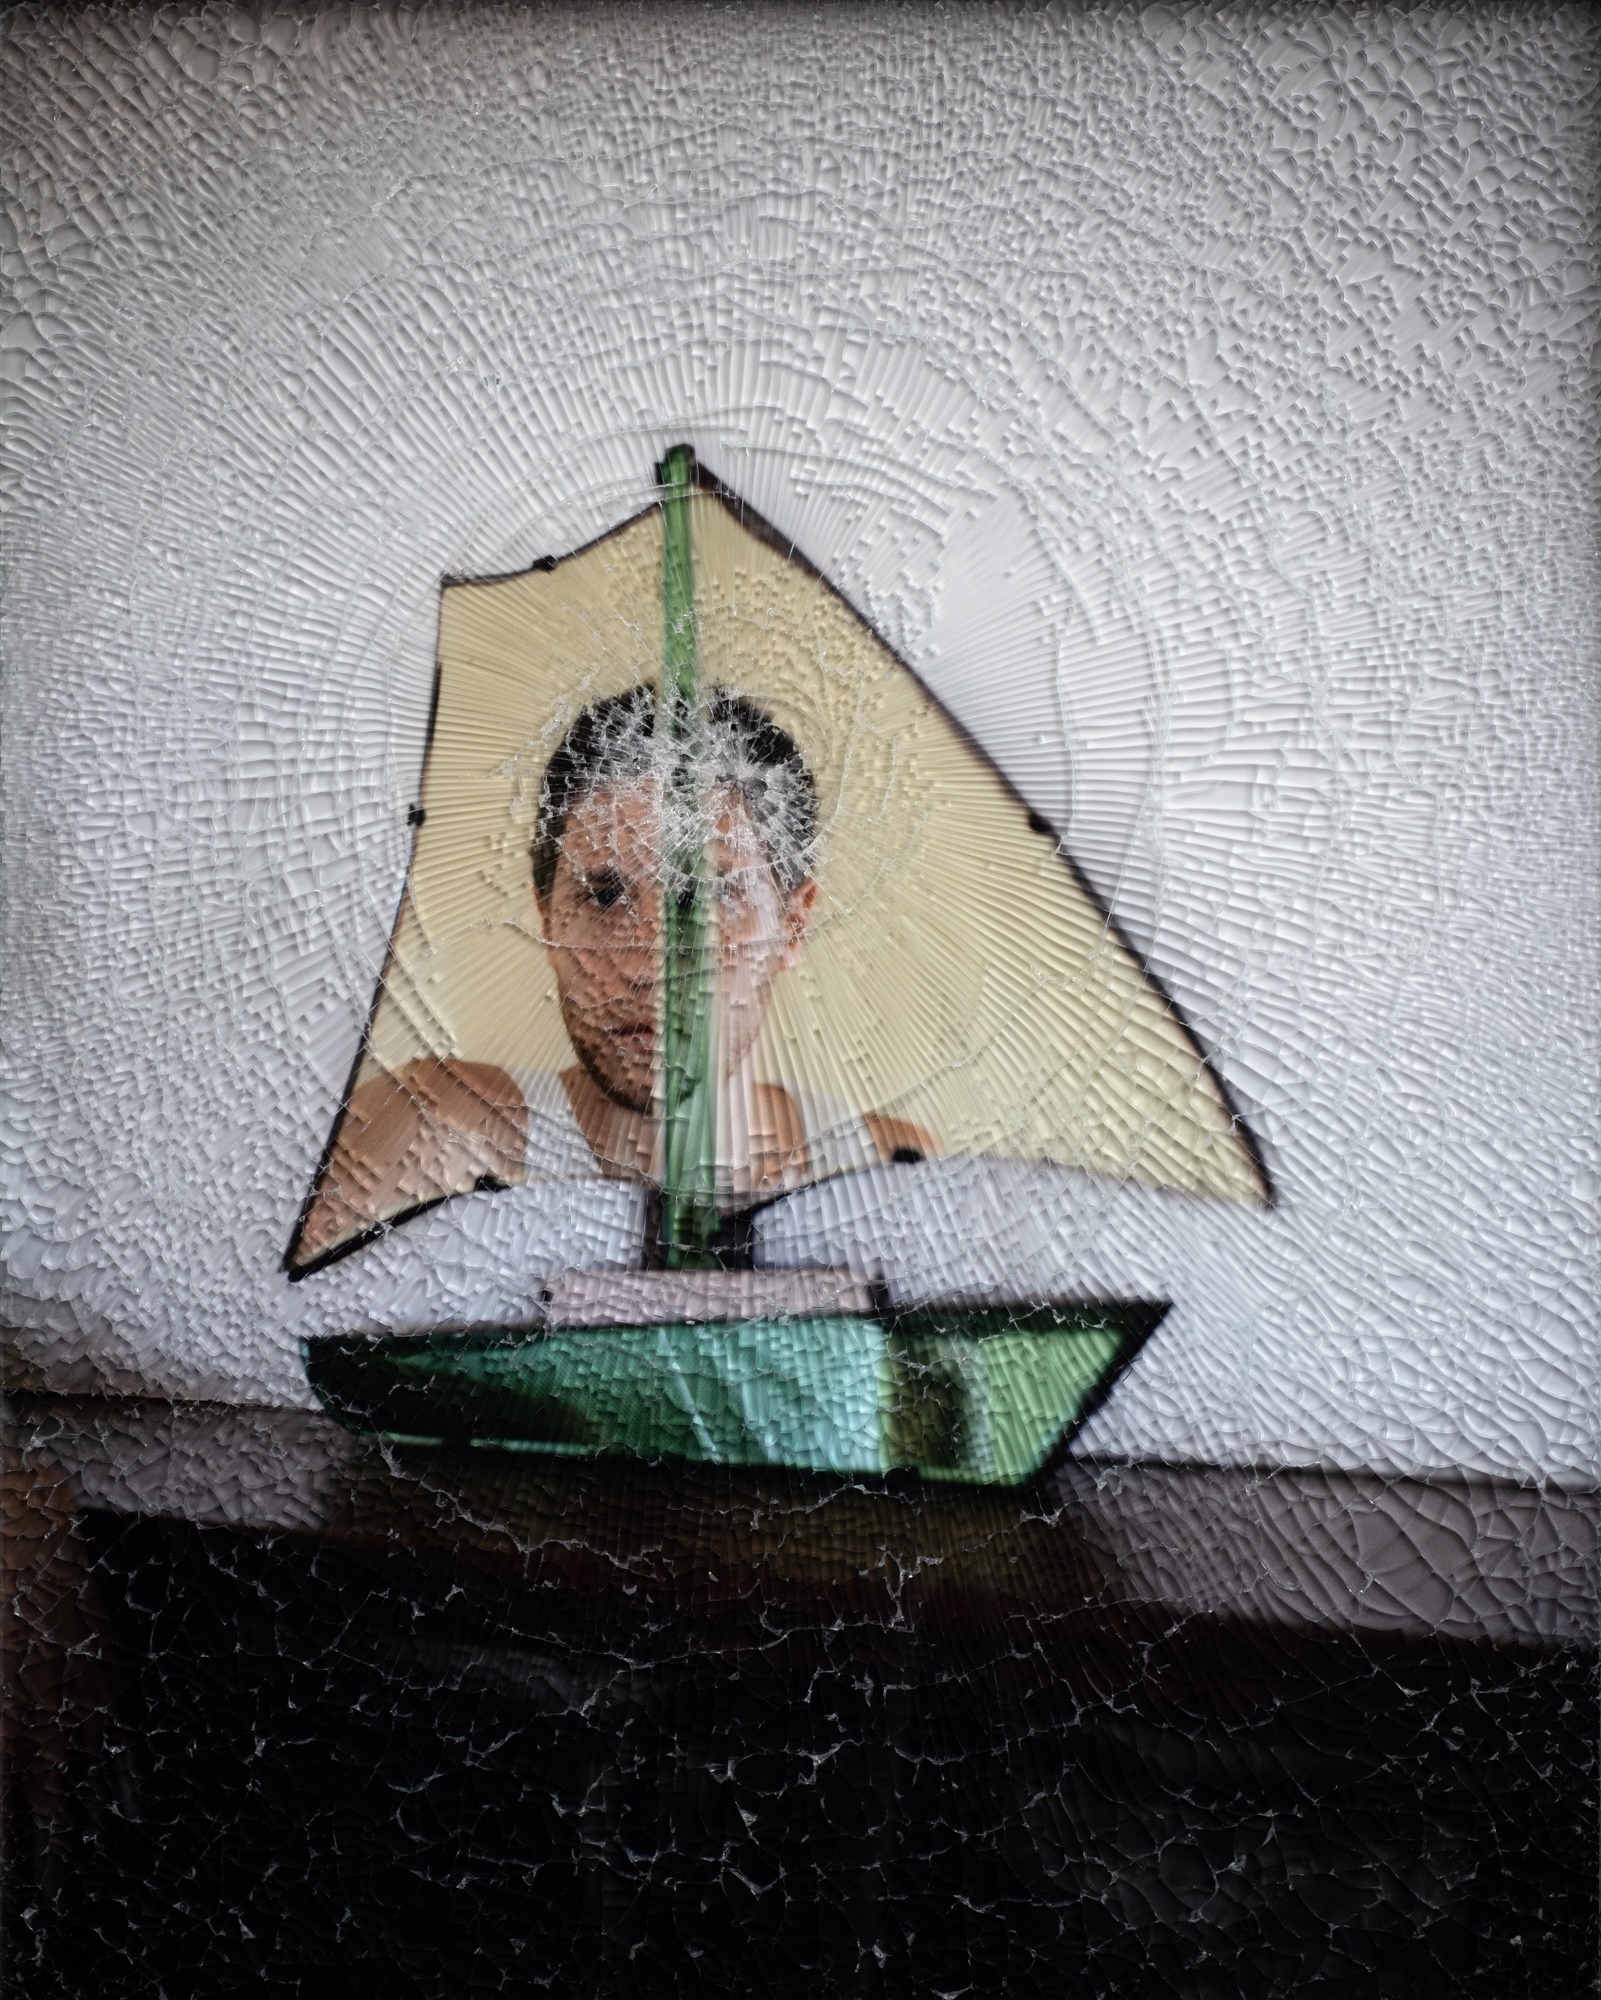 Artwork by Mikhael Subotzky, Boat 2, Made of inkjet on archival Dibond with face-mounted toughened glass uniquely smashed by the artist